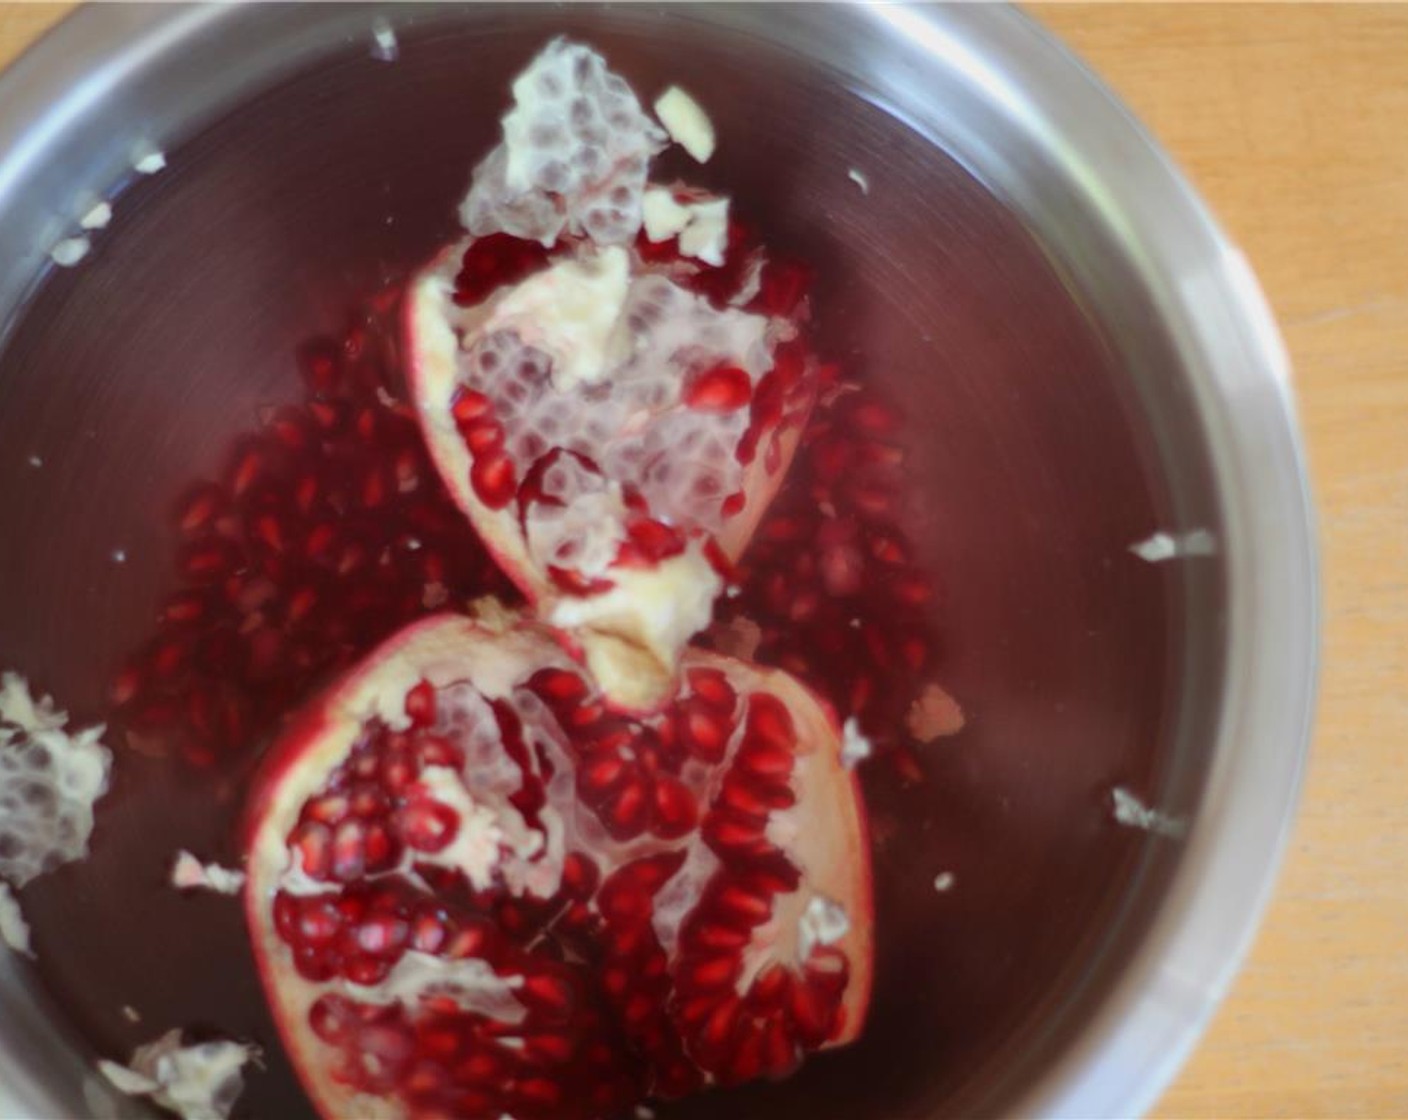 step 6 Soak the scored pomegranate in water for a few minutes, before breaking it apart and seeding it under water. The pith with float to the surface of the water as you continue to agitate the seeds. Drain them and side them aside.